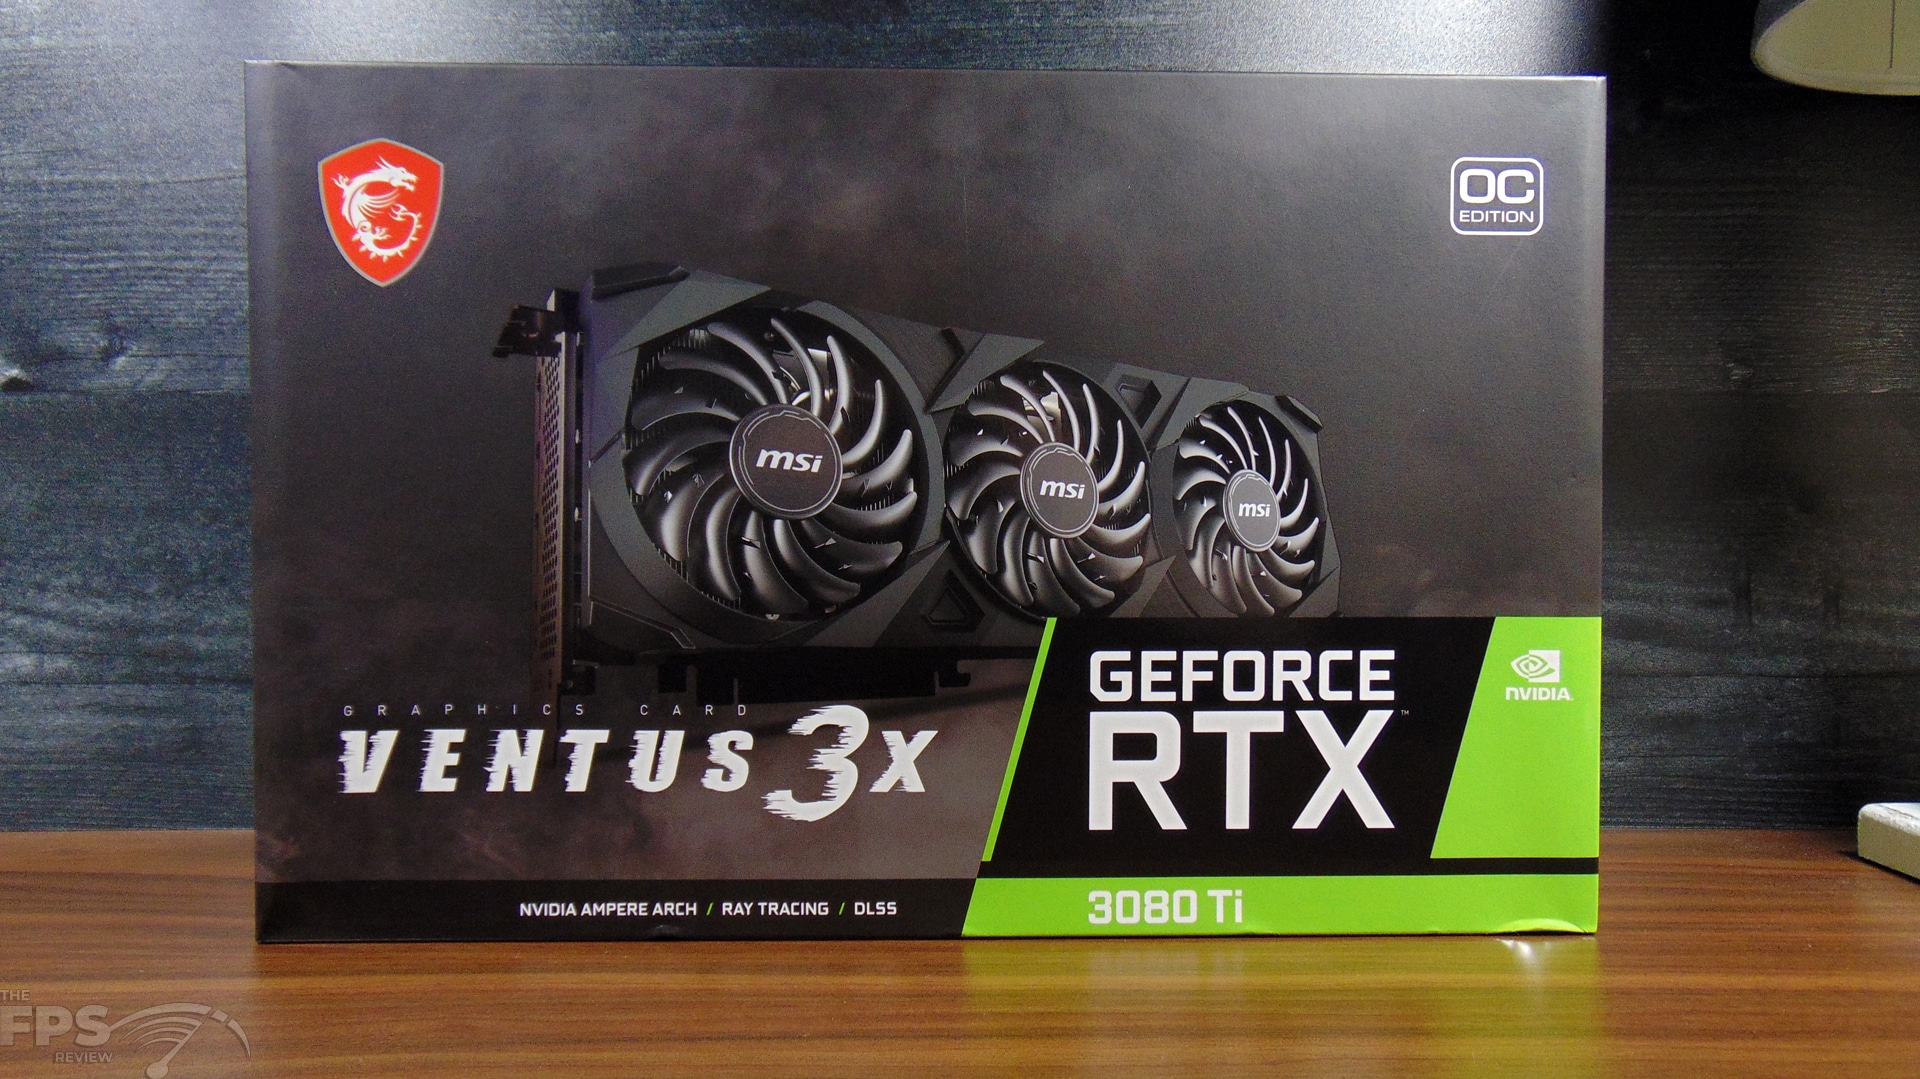 MSI GeForce RTX 3080 Ti VENTUS 3X 12G OC Video Card Review - The